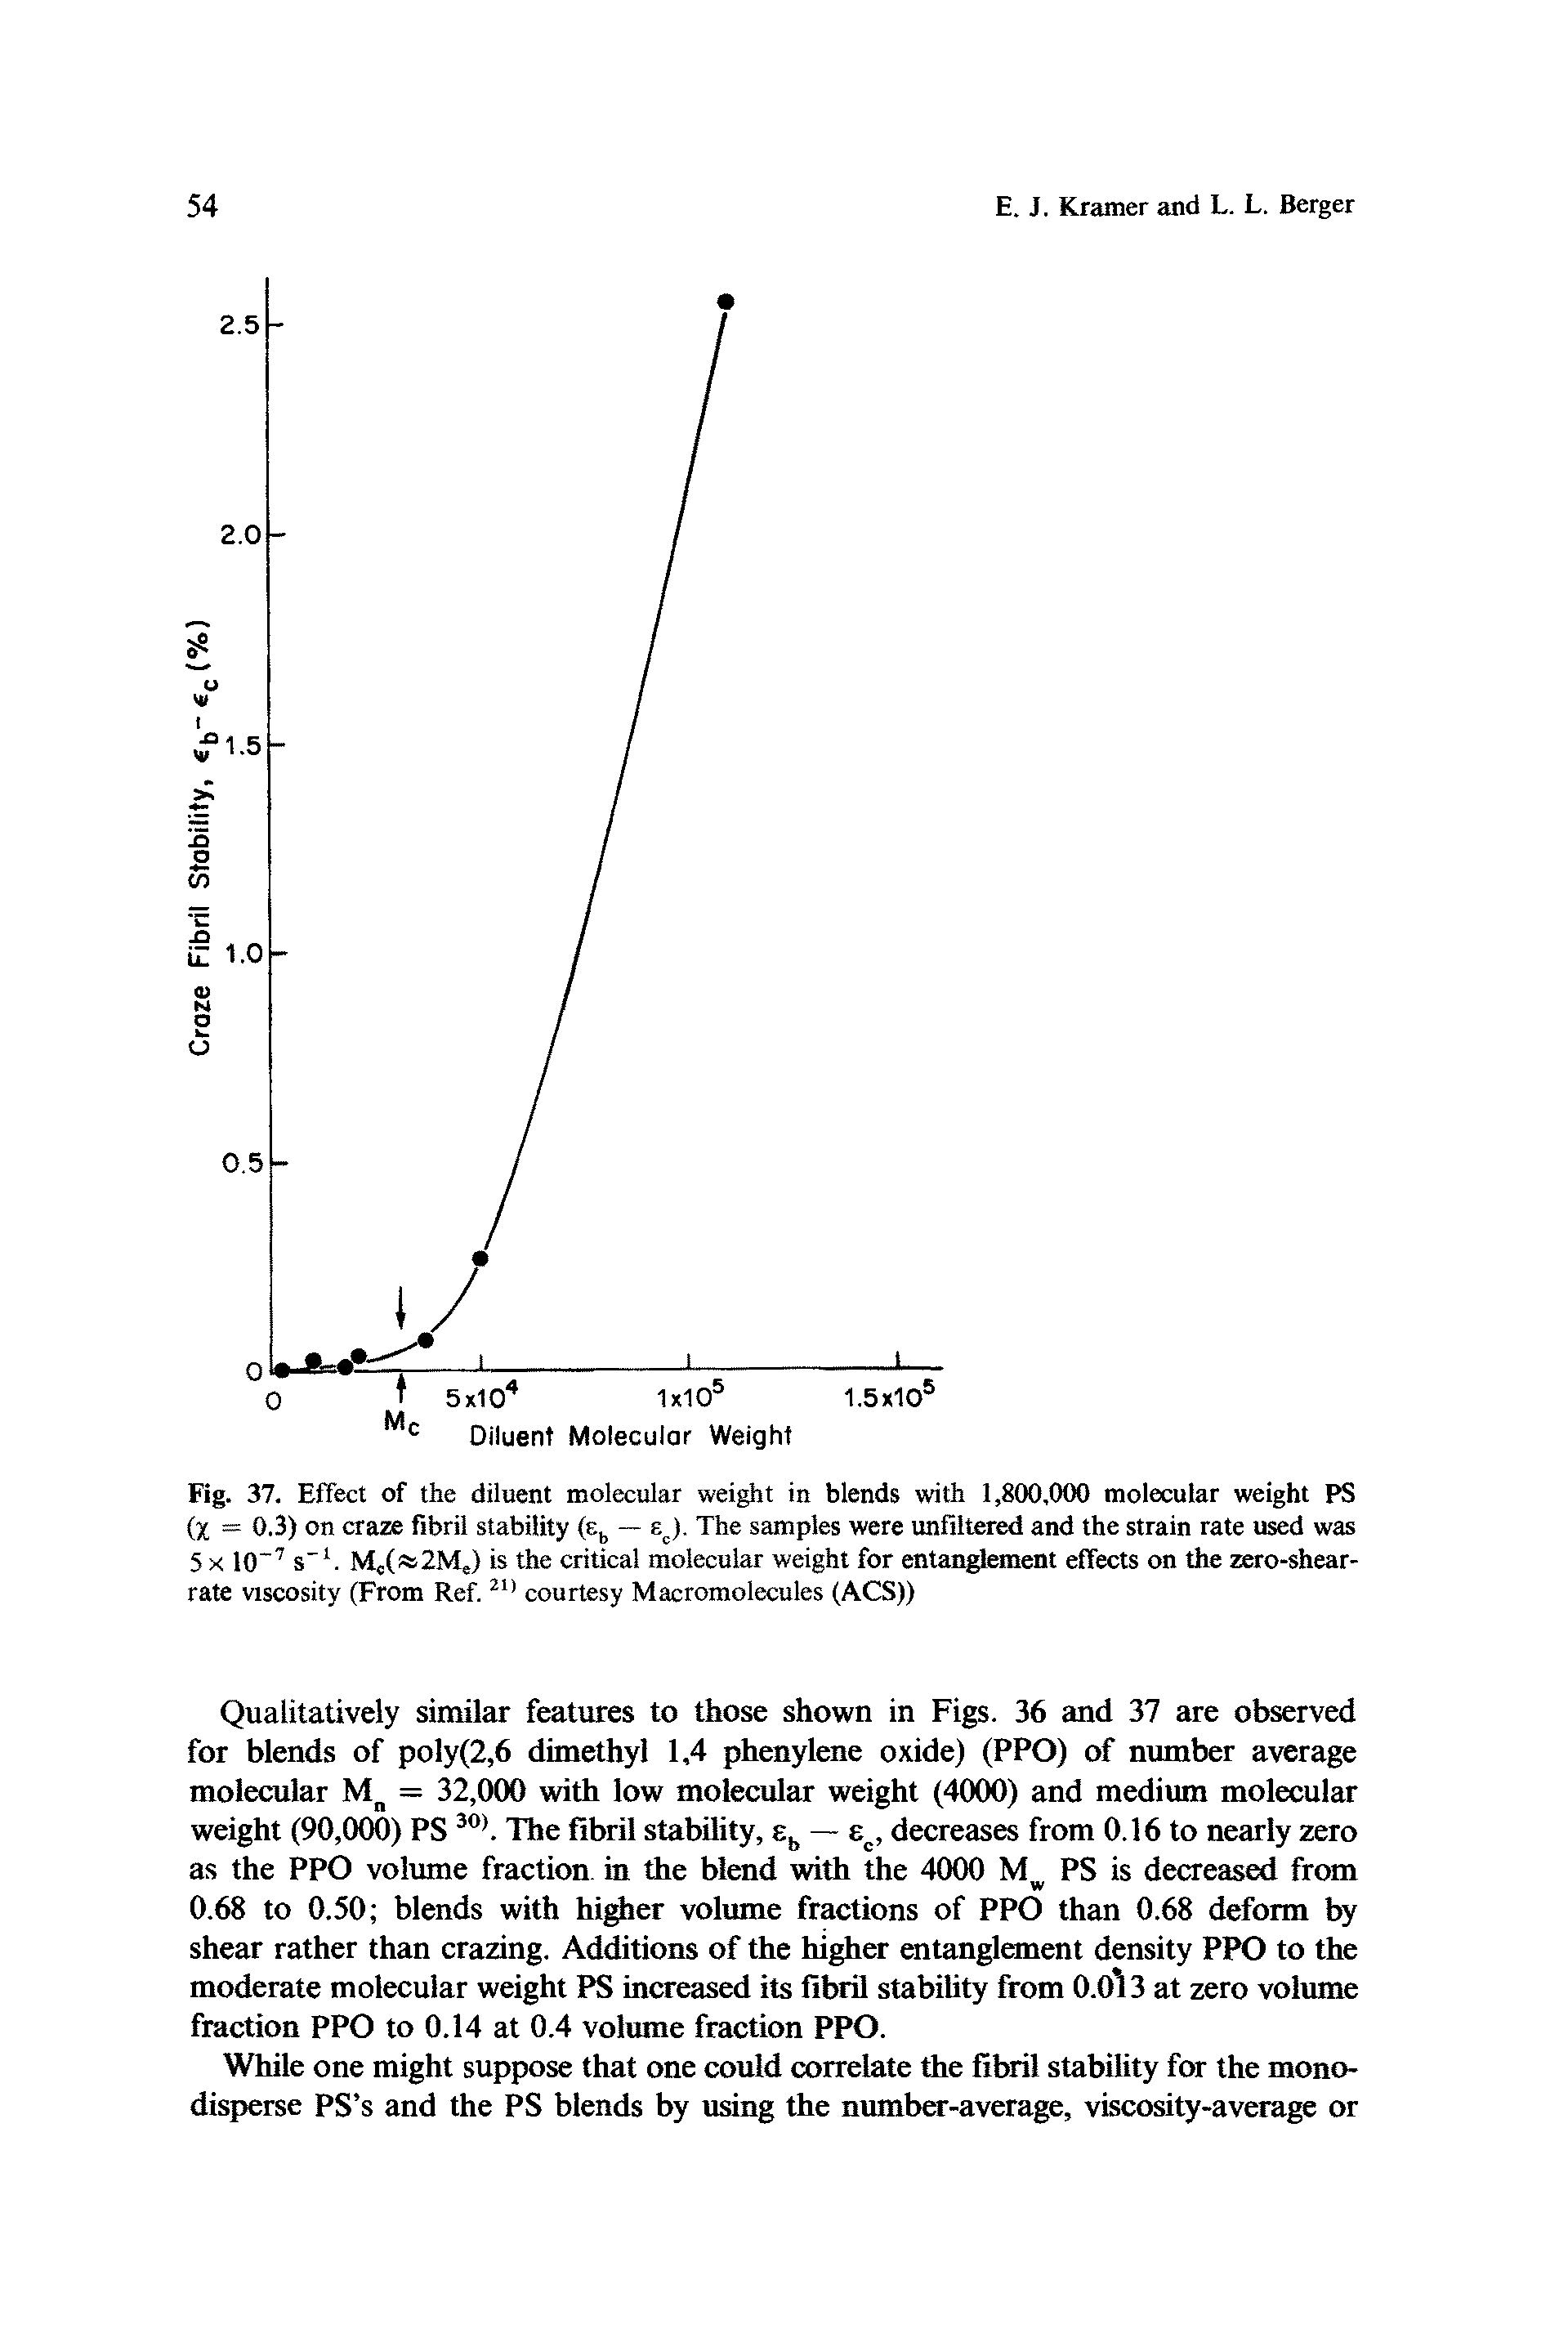 Fig. 37. Effect of the diluent molecular weight in blends with 1,800,000 molecular weight PS (X = 0.3) on craze fibril stability (e — ej. The samples were unfiltered and the strain rate used was 5 X 10 s Mc(as2Me) is the critical molecular weight for entanglement effects on the zero-shear-rate viscosity (From Ref. courtesy Macromolecules (ACS))...